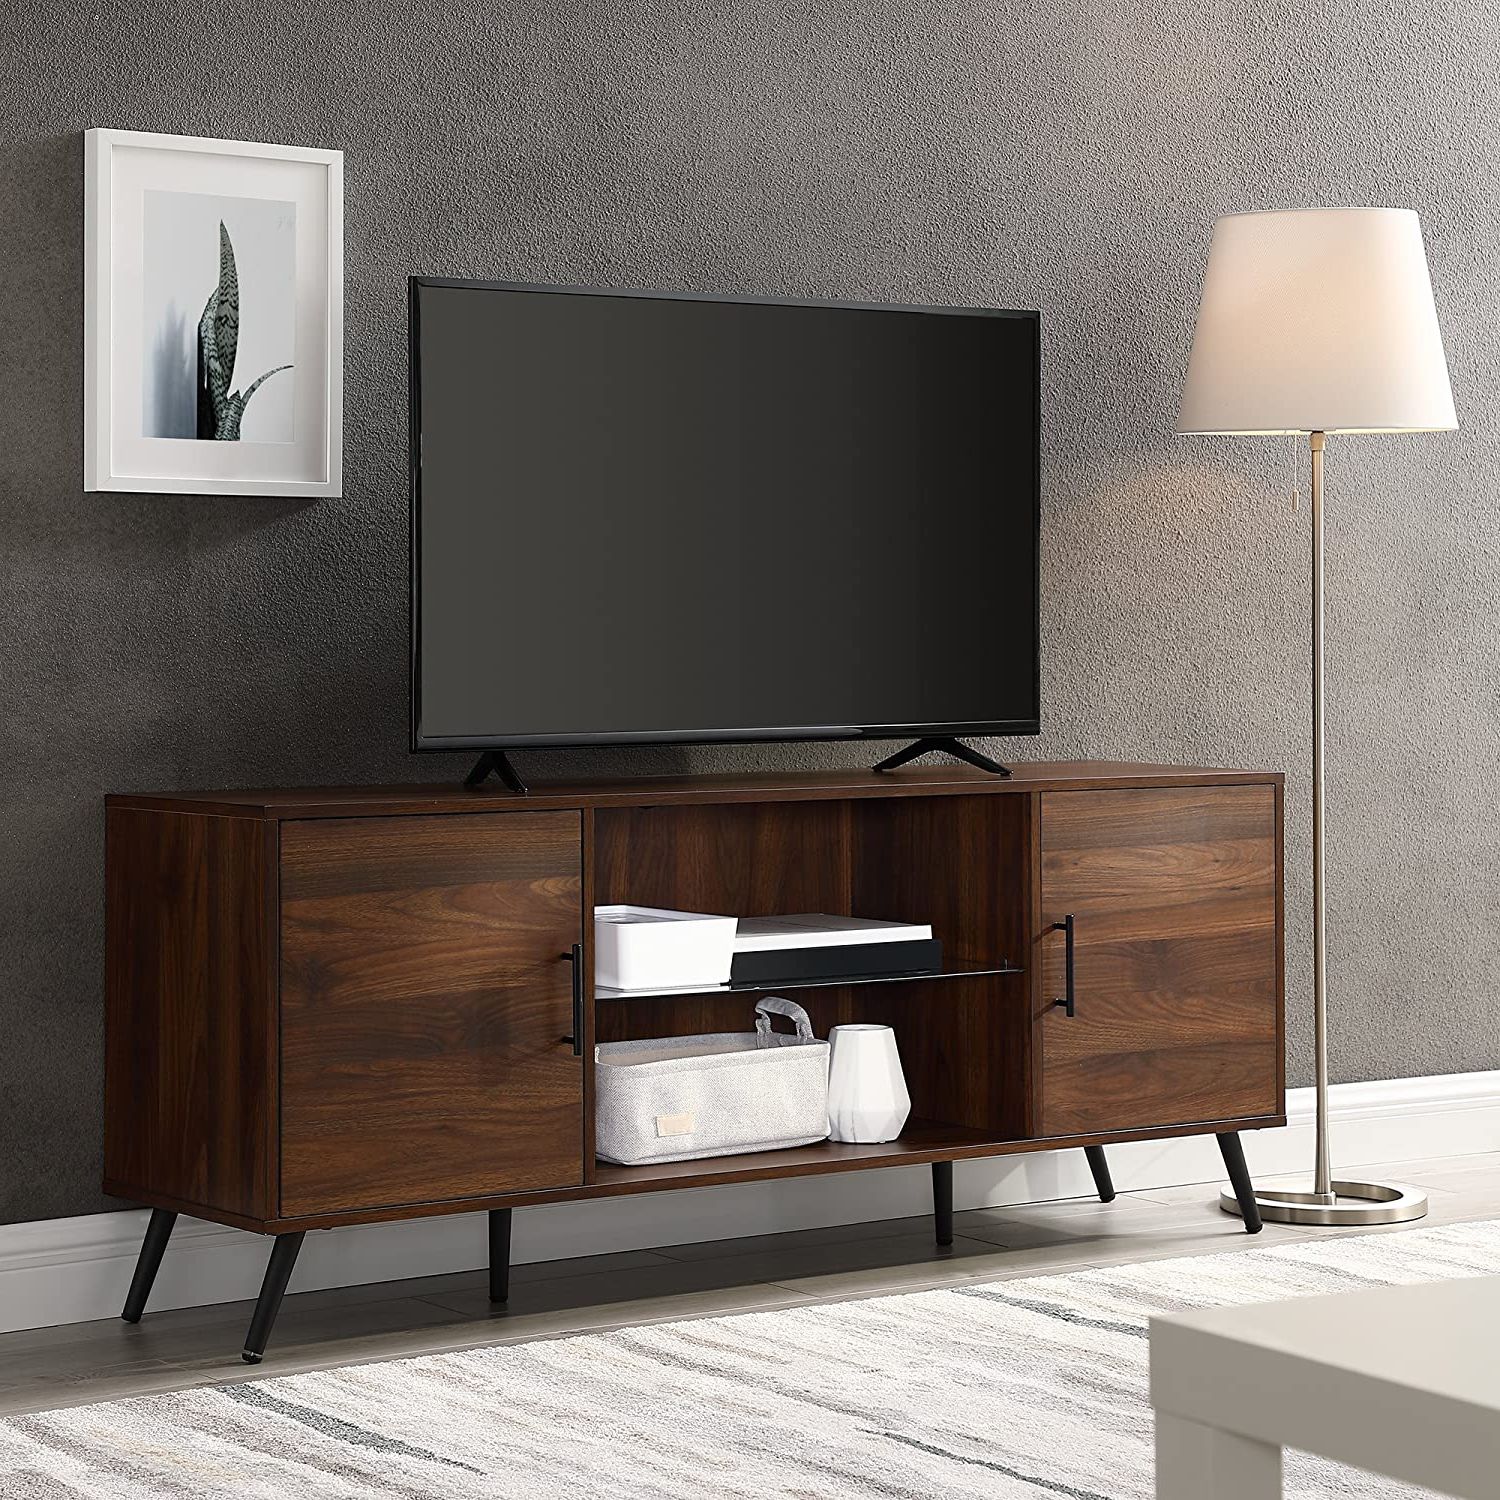 Oaklee Tv Stands Intended For Newest The Best Tv Stands To House Your Home Entertainment – Bob Vila (View 10 of 15)